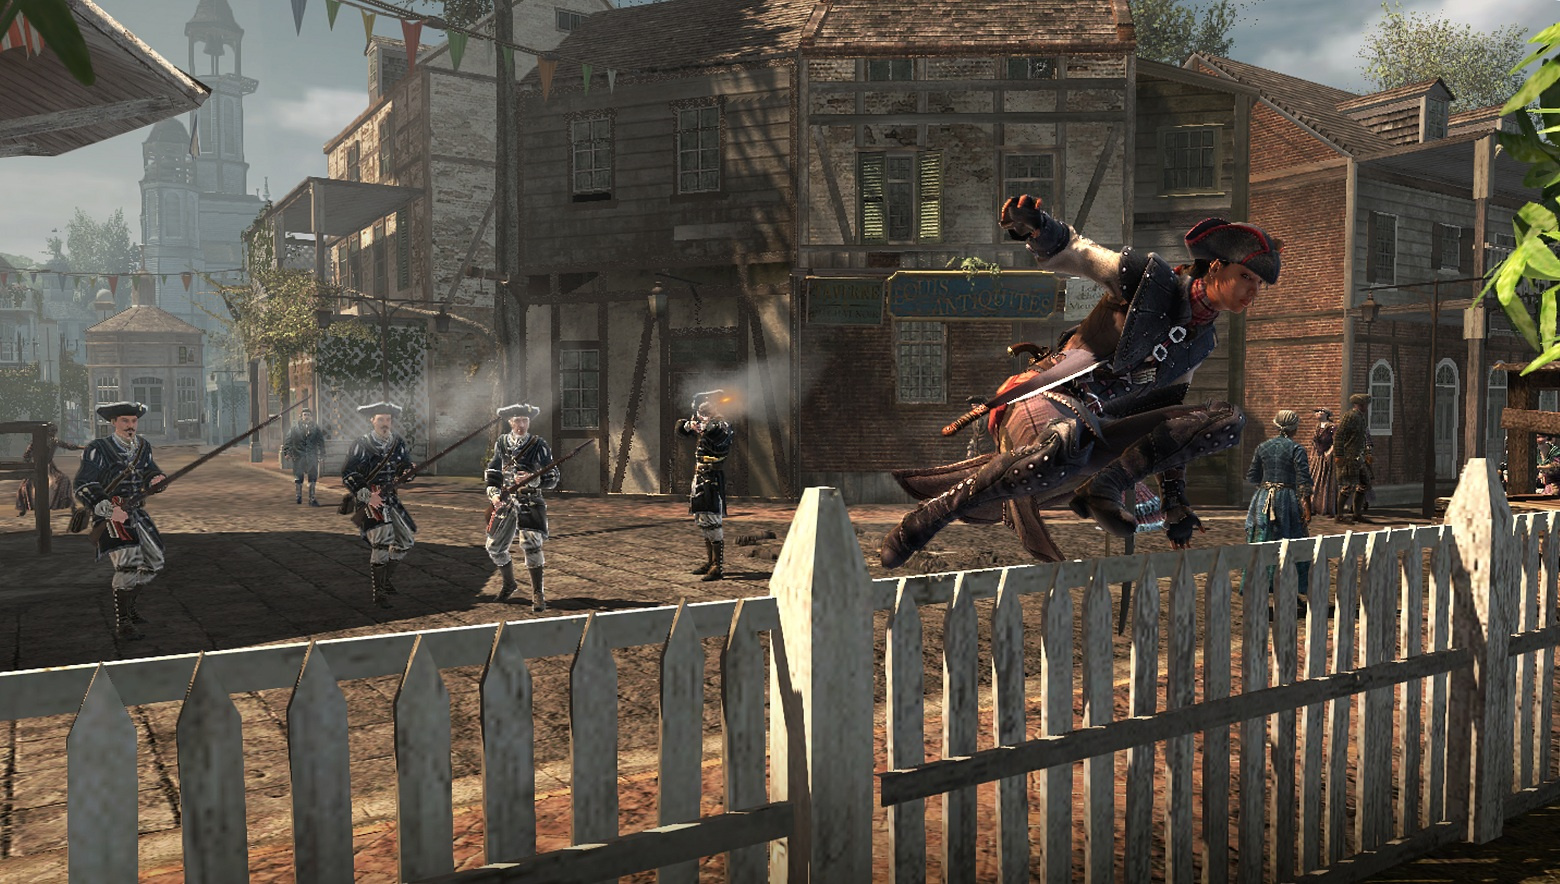 Assassin's Creed: Bloodlines Review – PS Vita Reviews